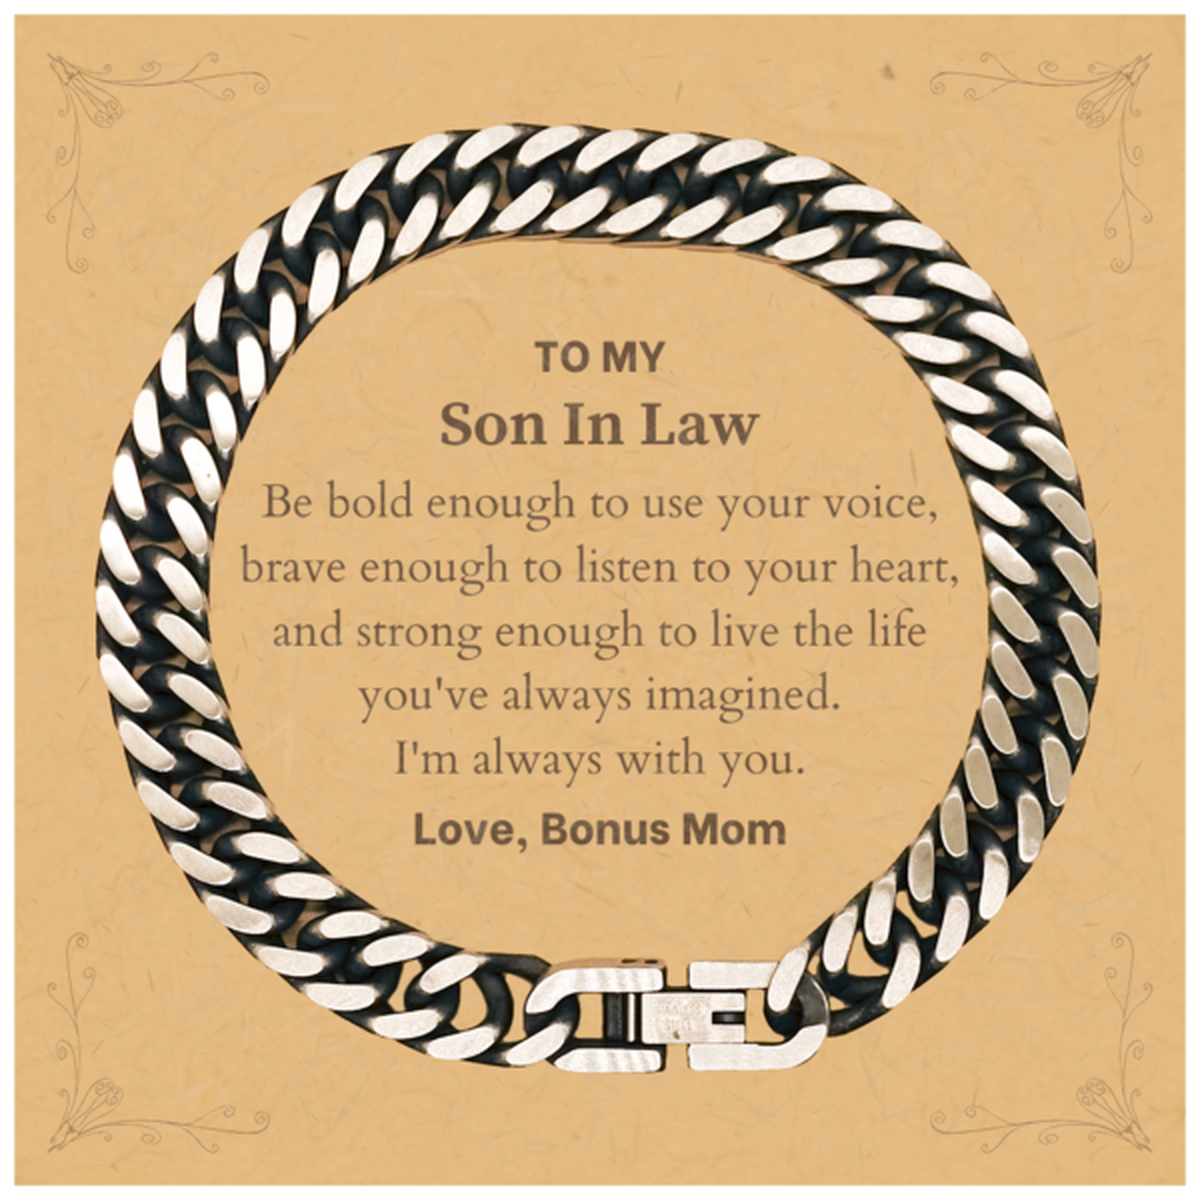 Keepsake Son In Law Cuban Link Chain Bracelet Gift Idea Graduation Christmas Birthday Son In Law from Bonus Mom, Son In Law Be bold enough to use your voice, brave enough to listen to your heart. Love, Bonus Mom